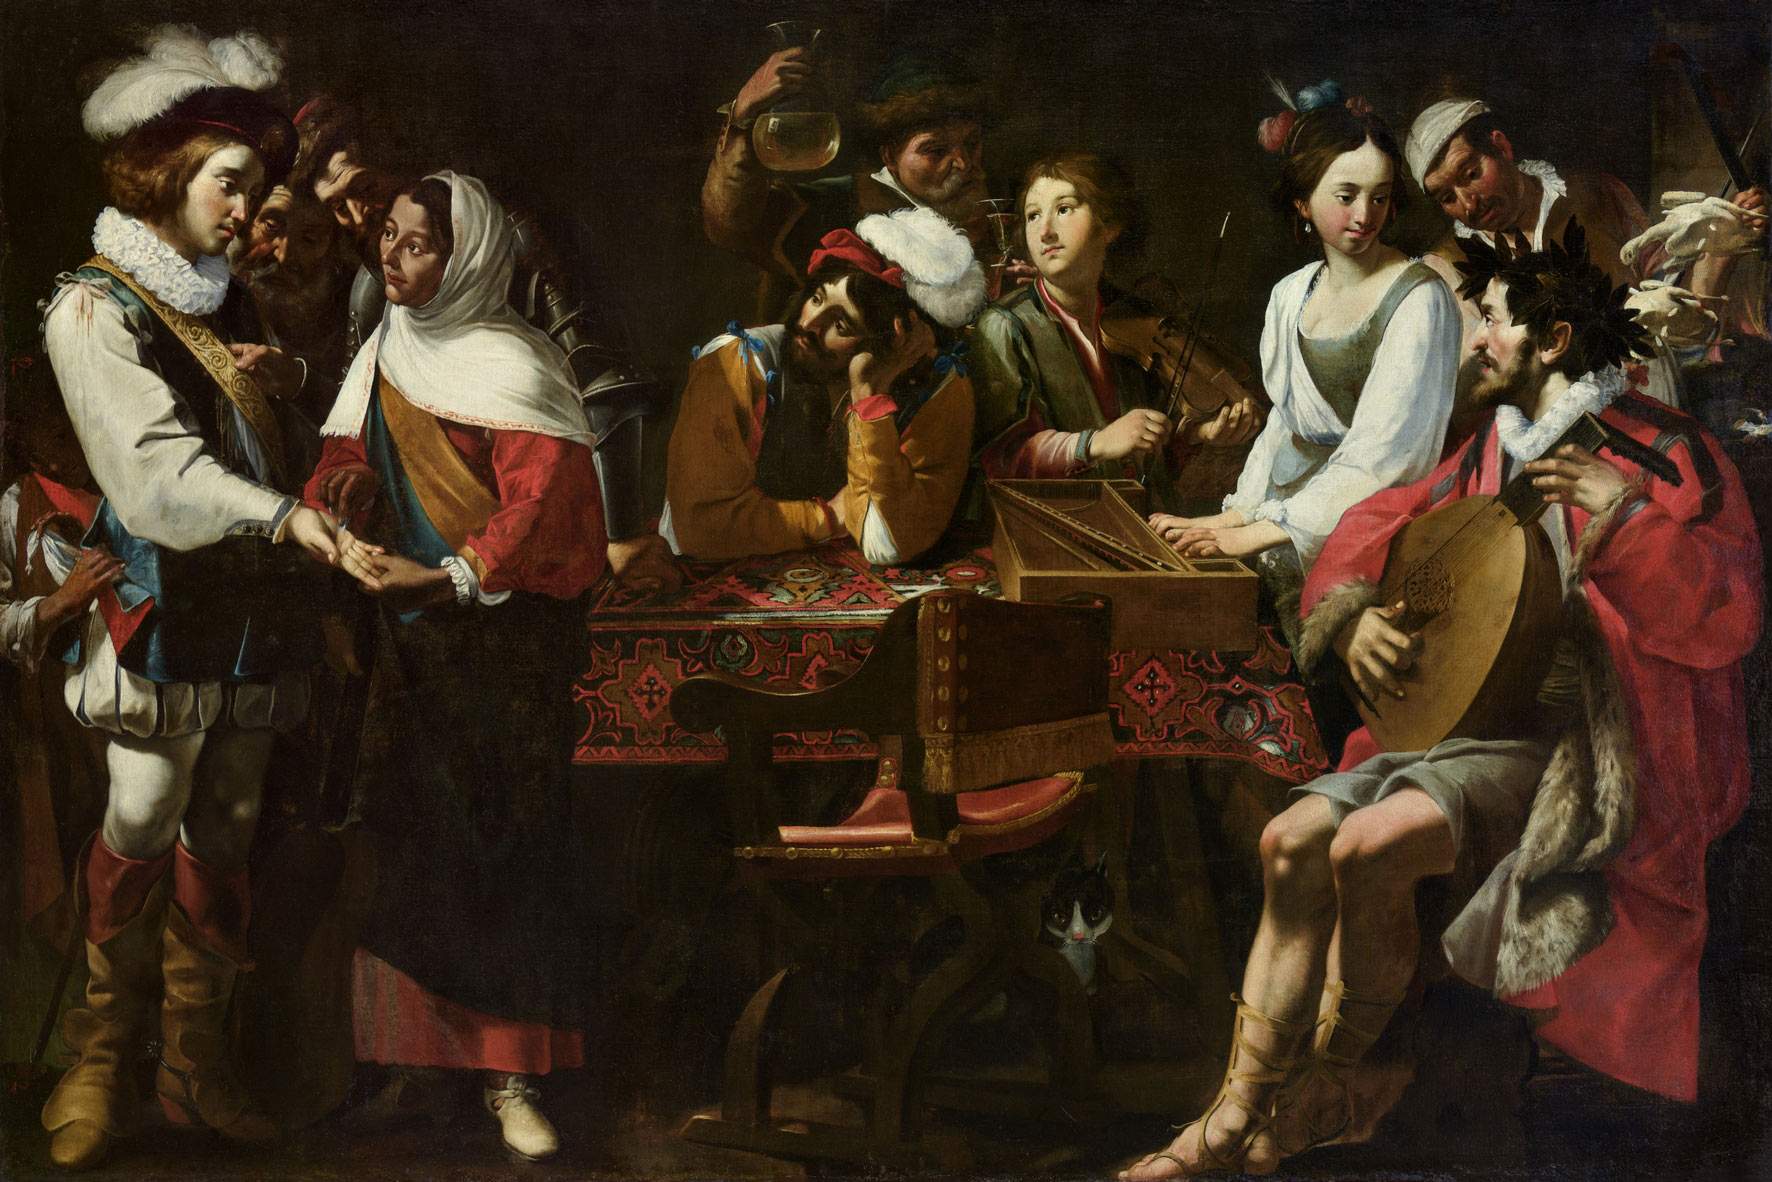 A major Baroque conference to investigate persistence and reworking of Caravaggism in the seventeenth century